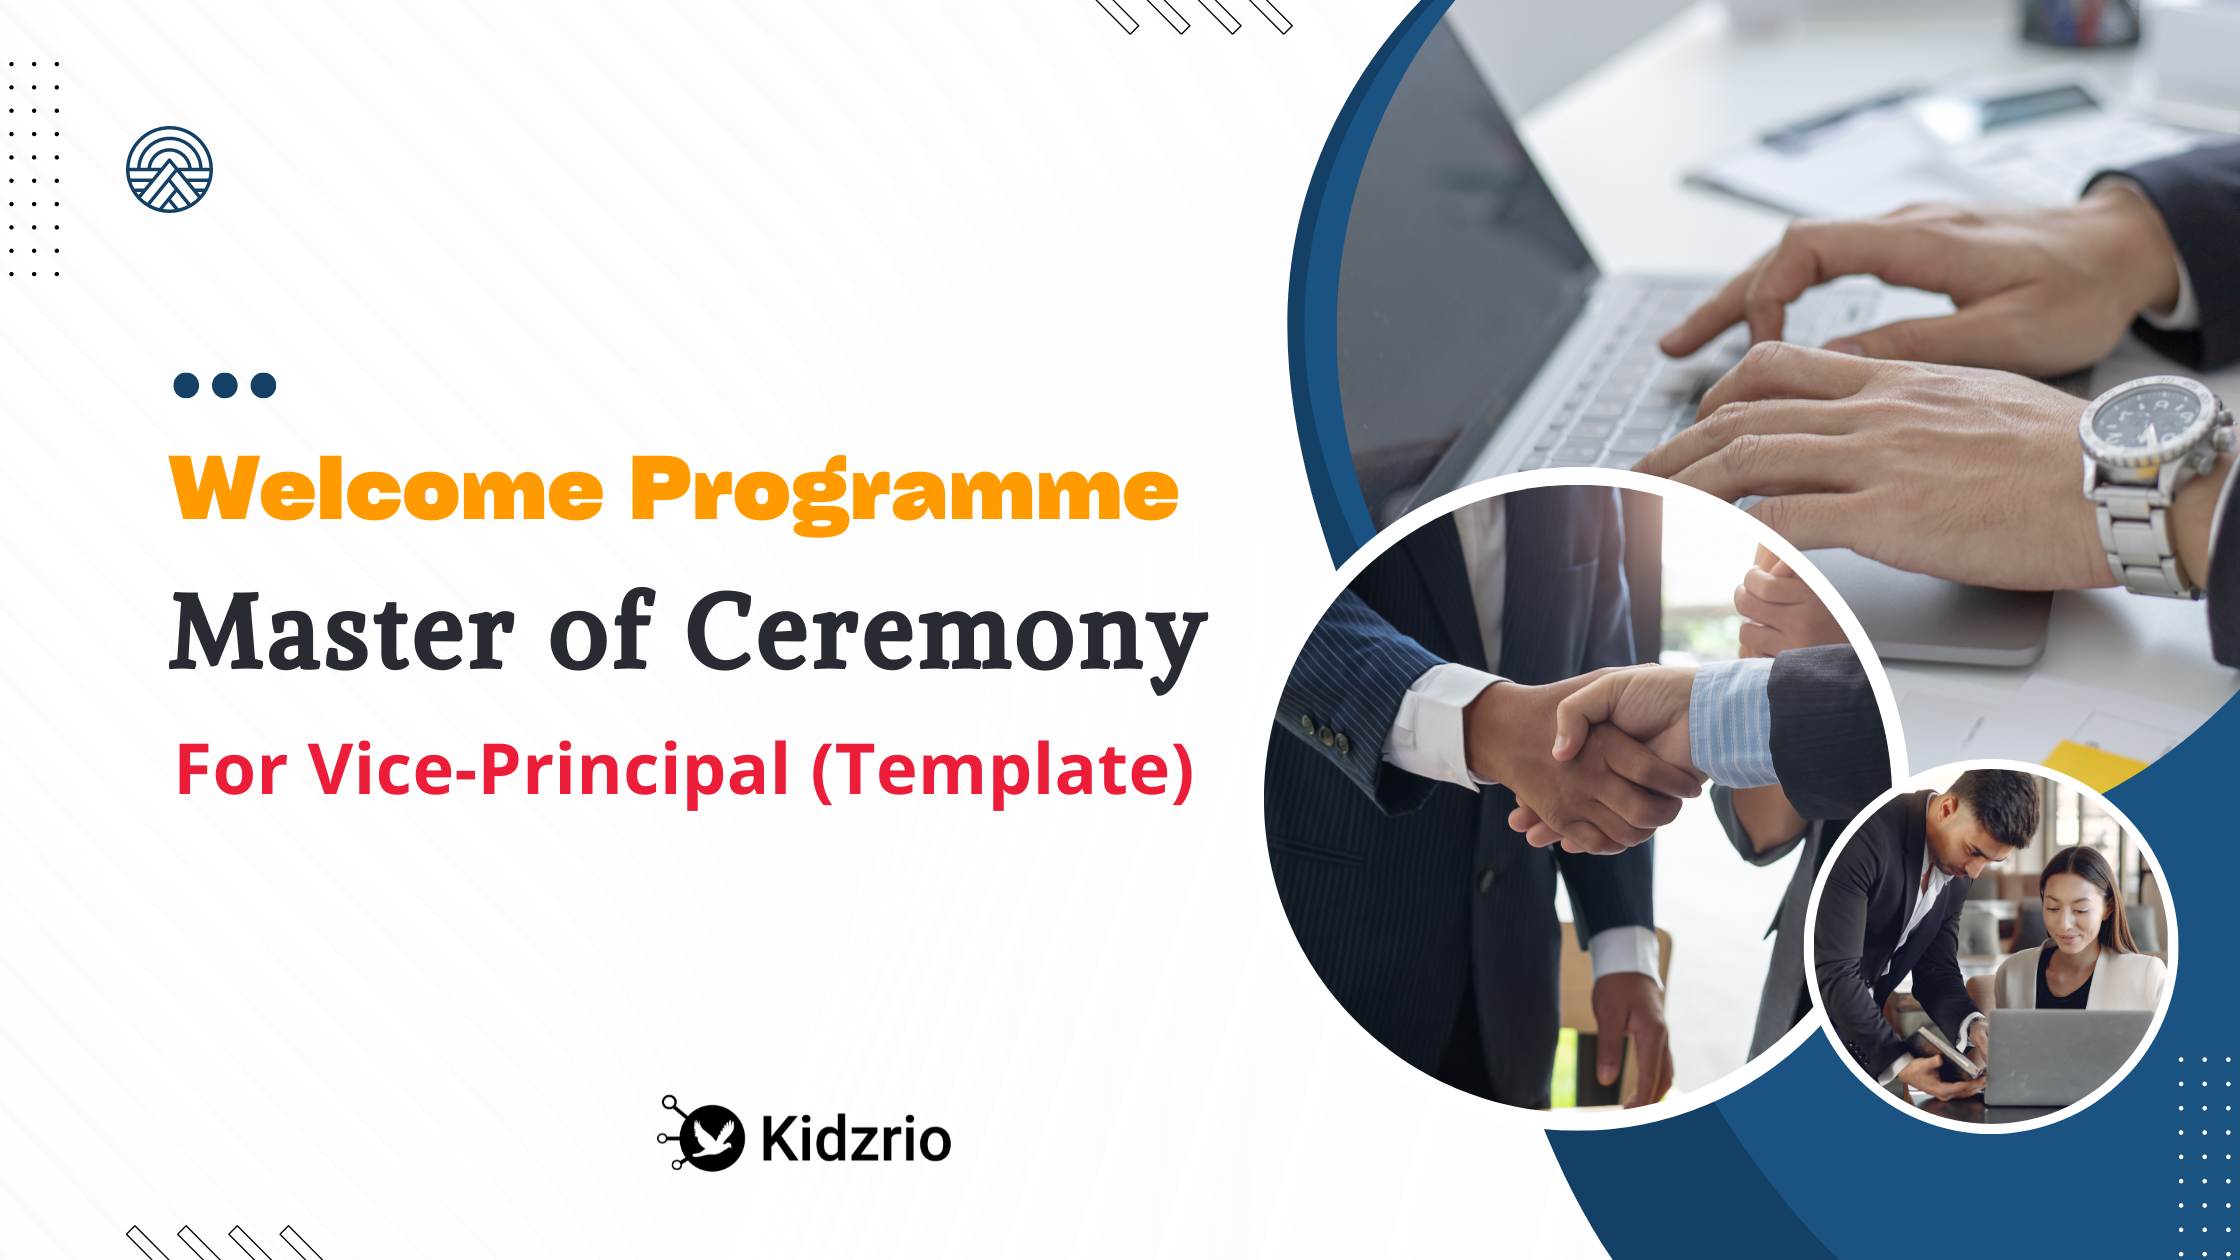 welcome program master of ceremony for vice principal (Template)